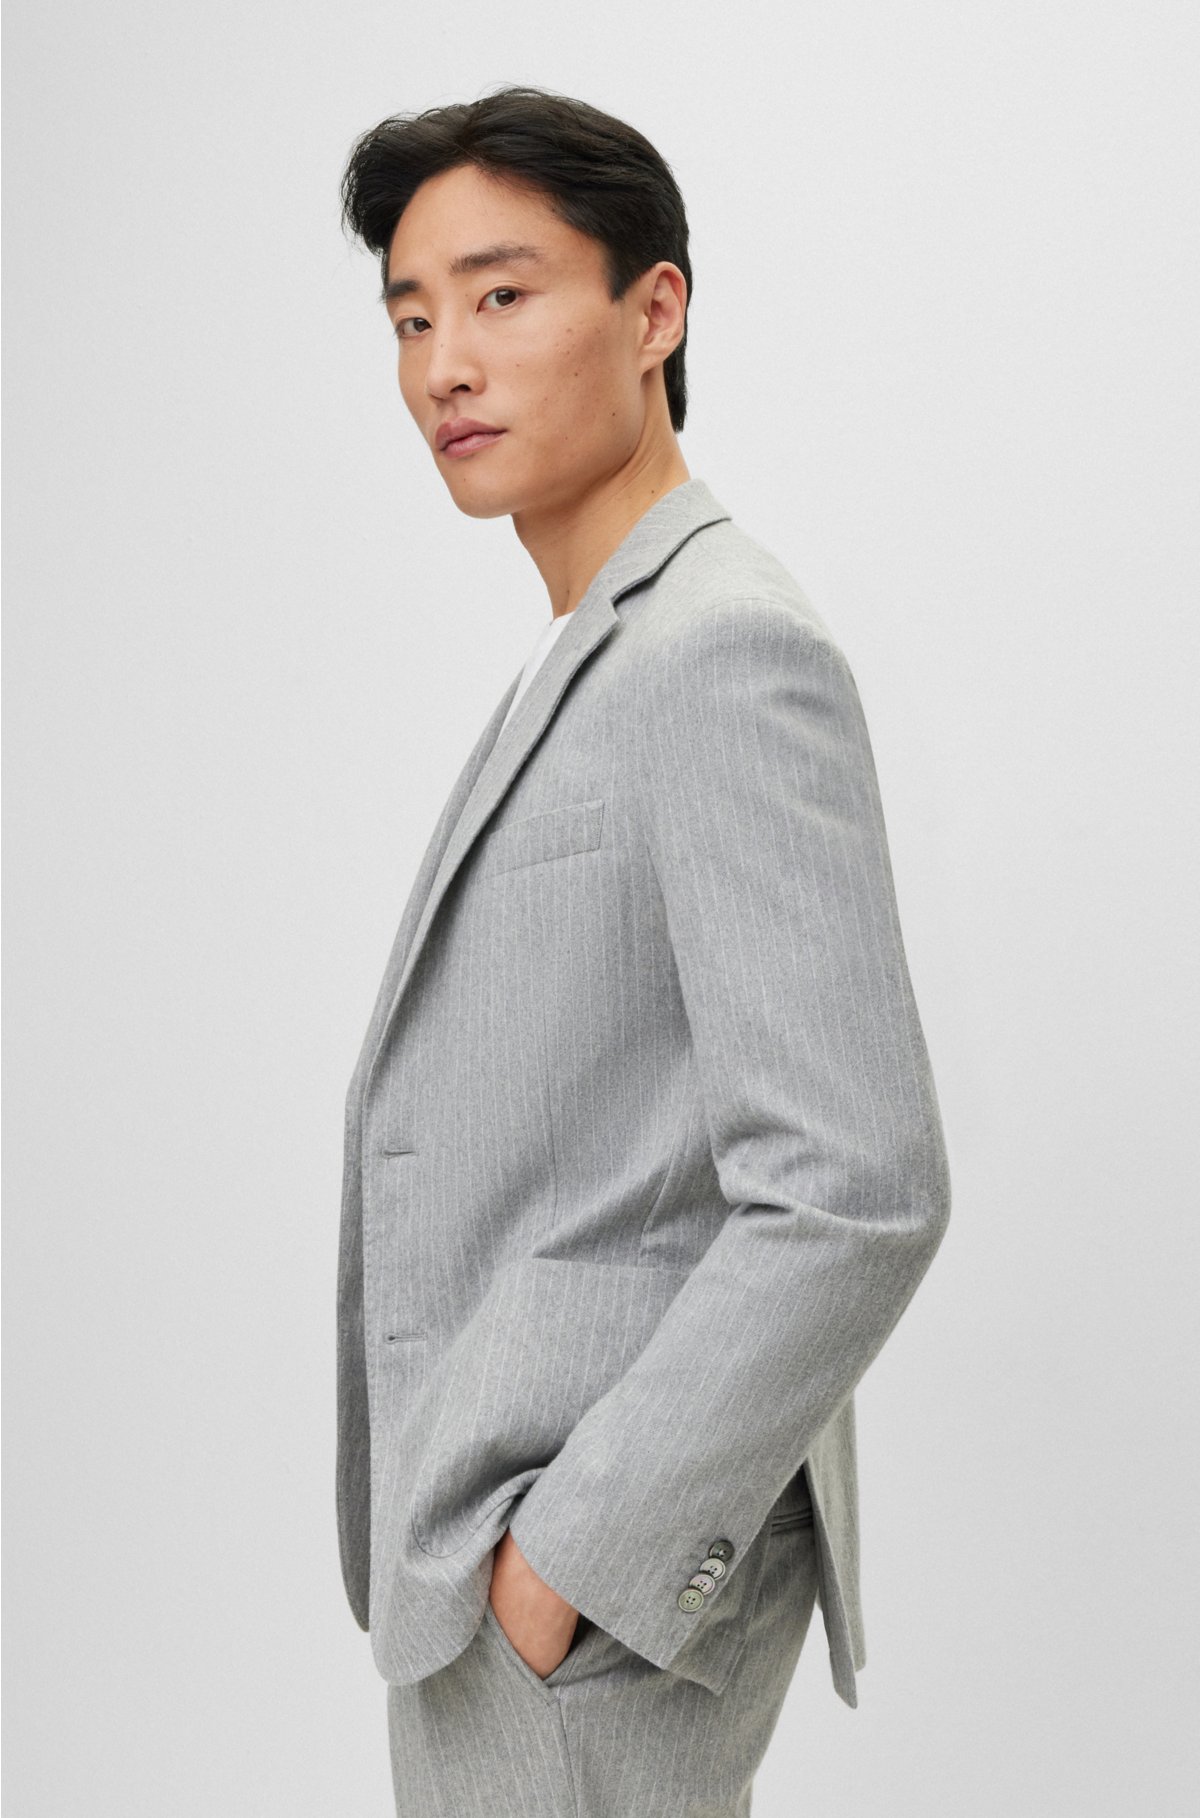 Slim-fit suit in striped stretch cotton, Grey